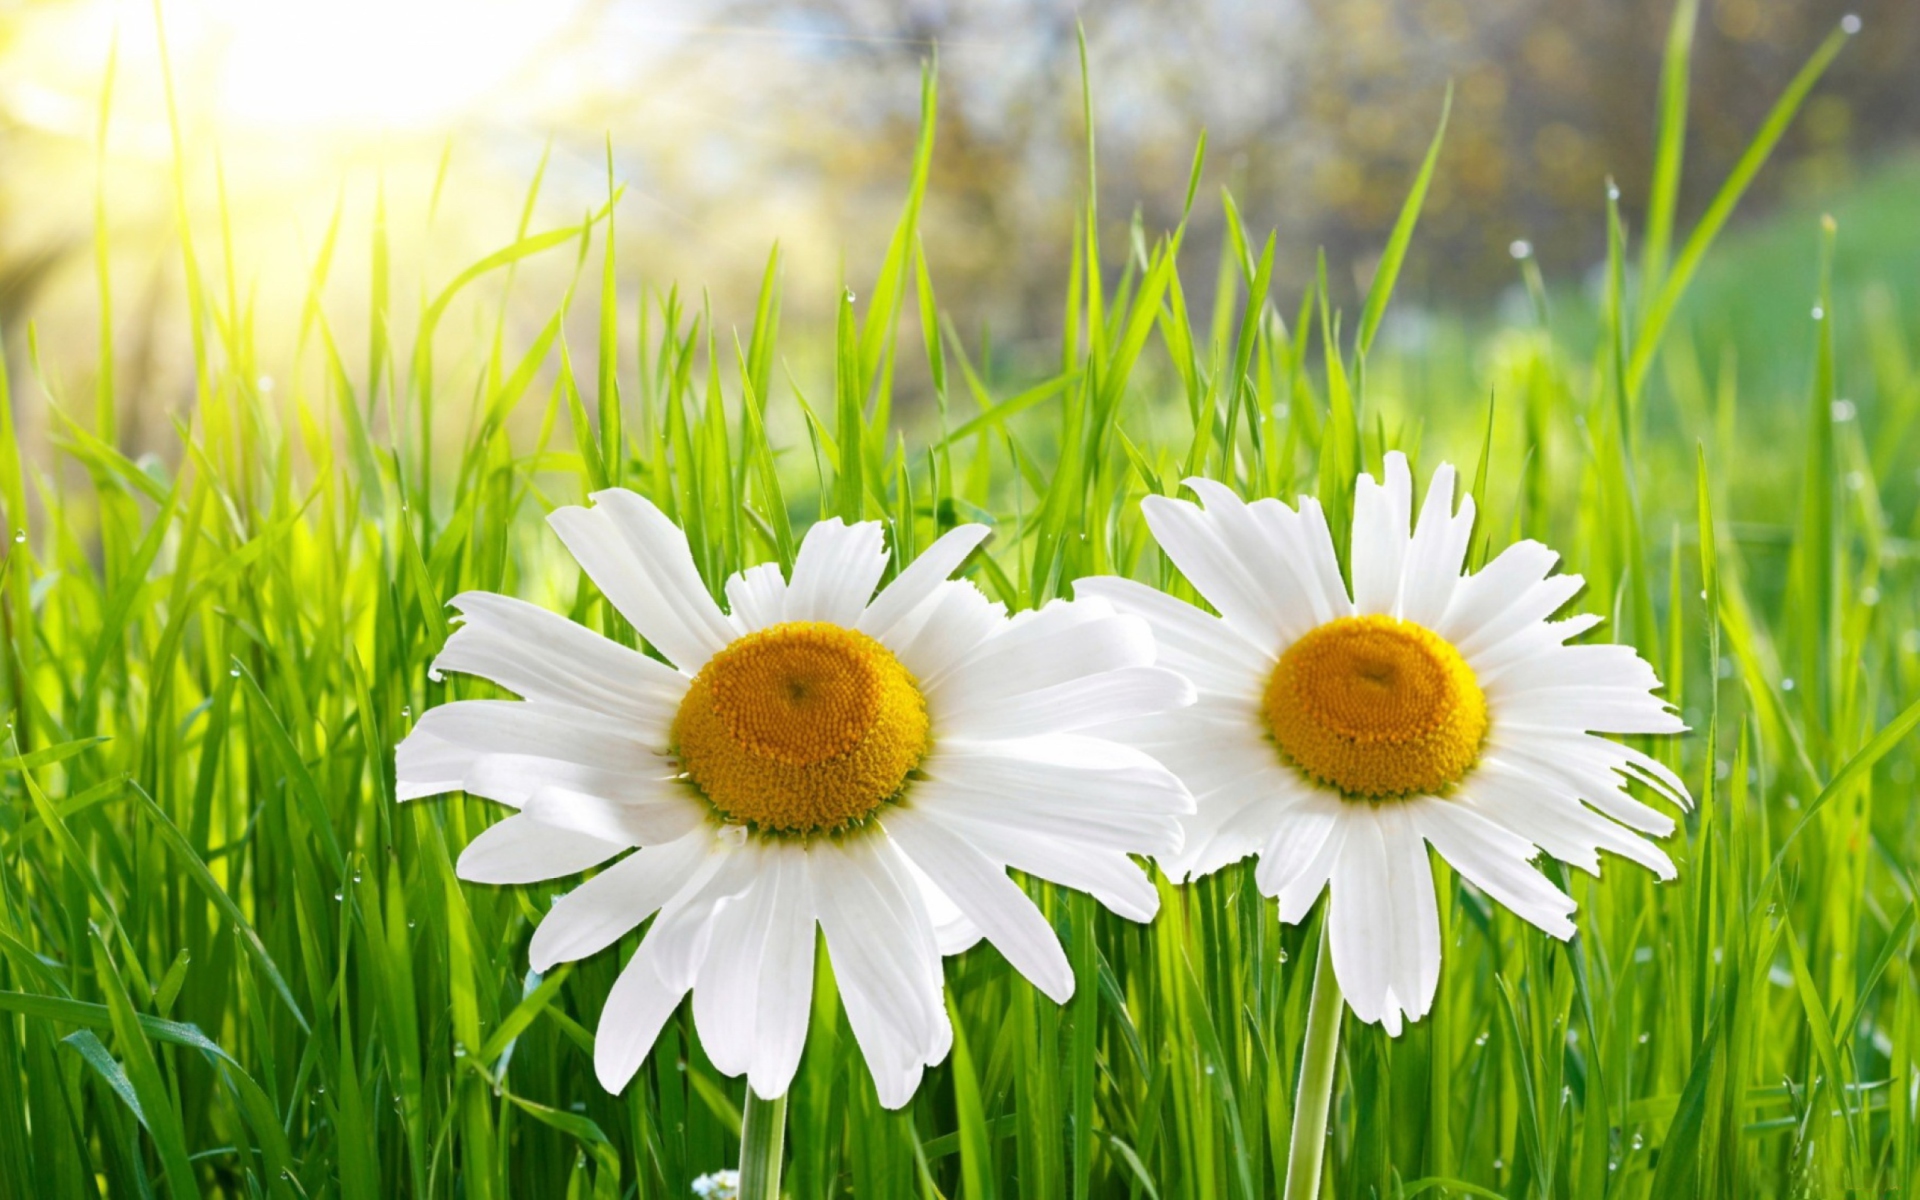 Wallpaper Full HD earth, camomile, close up, daisy, flower, grass, white flower, flowers